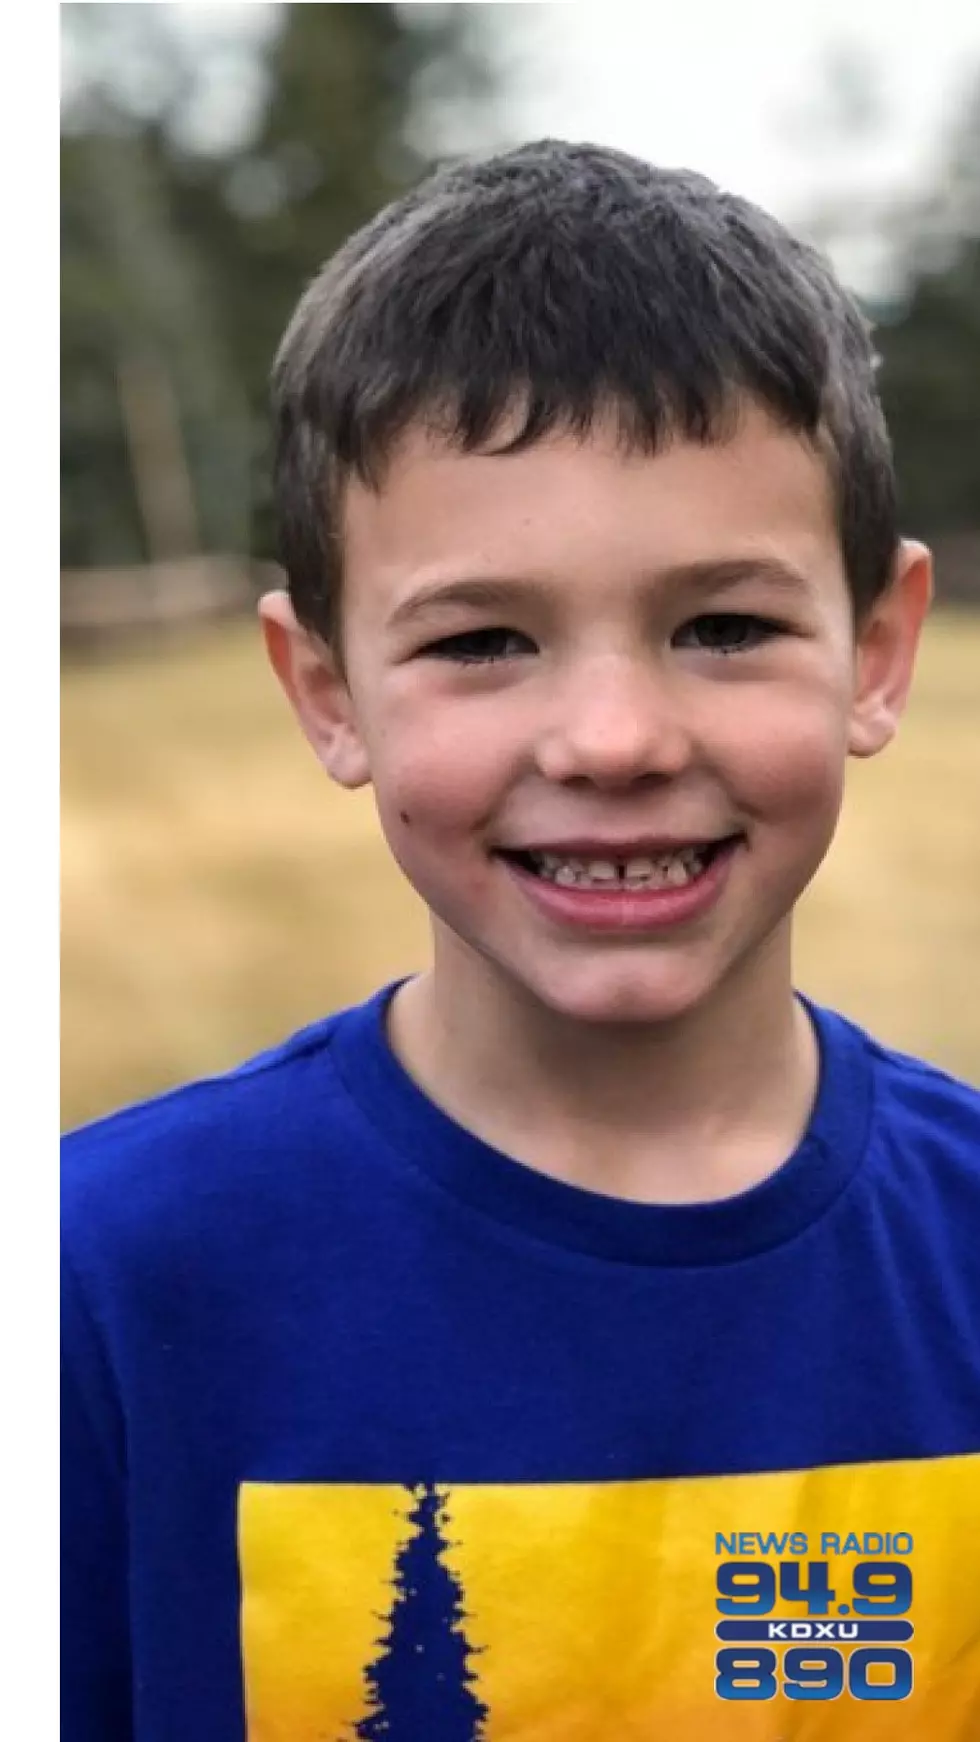 6-year-old killed after falling from dad’s lap, getting struck by snow removal bucket identified